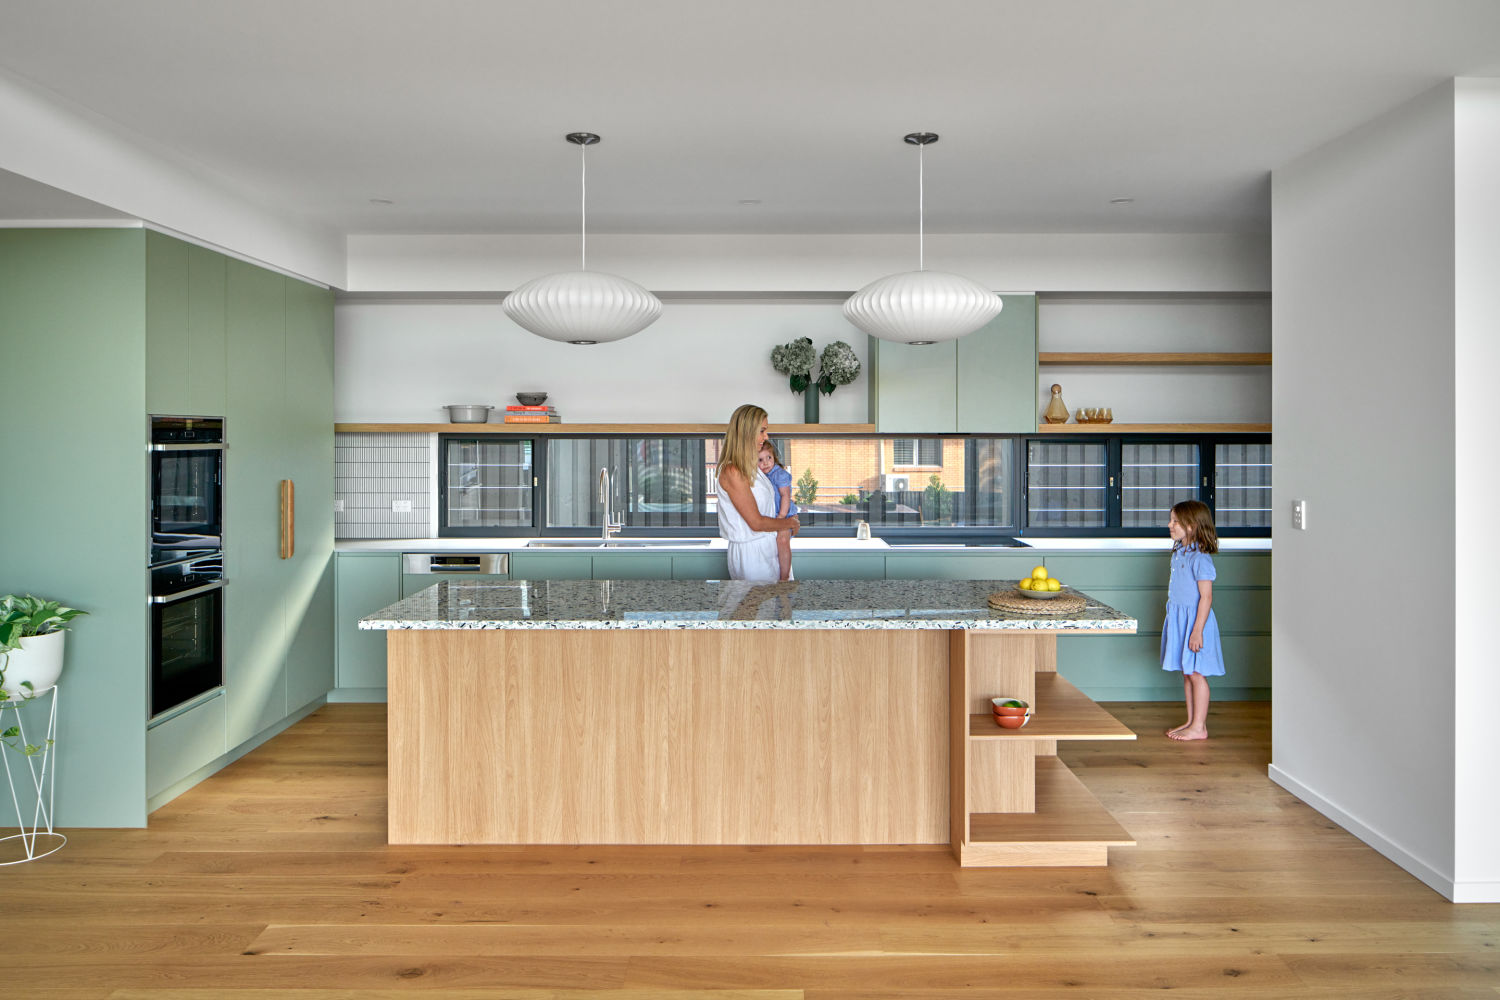 The suite of finishes echoes the clean Modernist styling, with hints of timber amongst crisp splashes of colours throughout the joinery, informed by the cool tones of recycled glass featured in the kitchen benchtop.